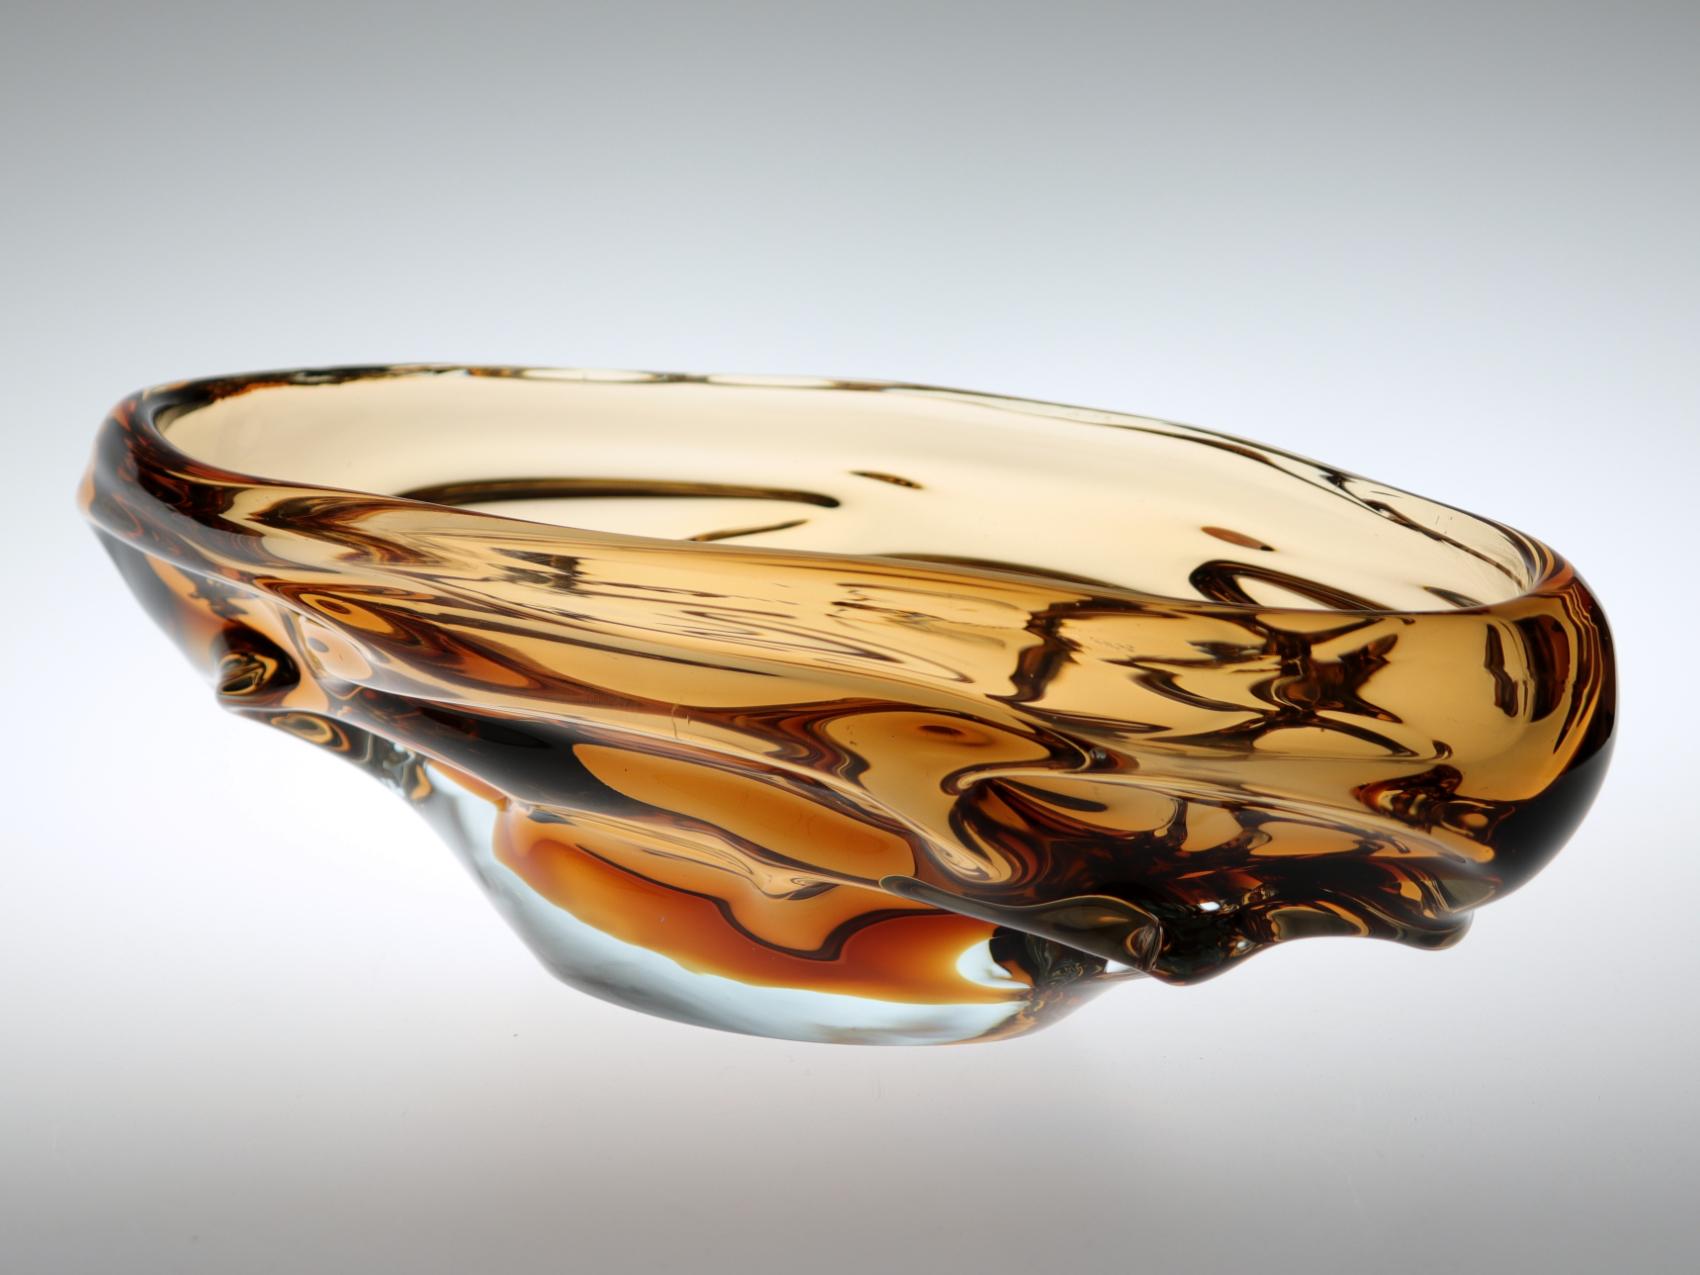 This is a wonderful massive Skrdlovice glass bowl in amber color. This stunning bohemian glass bowl was designed by Jan Beranek in the 1960s and made in Skrdlovice glasswork. Very good condition, no chips.
    